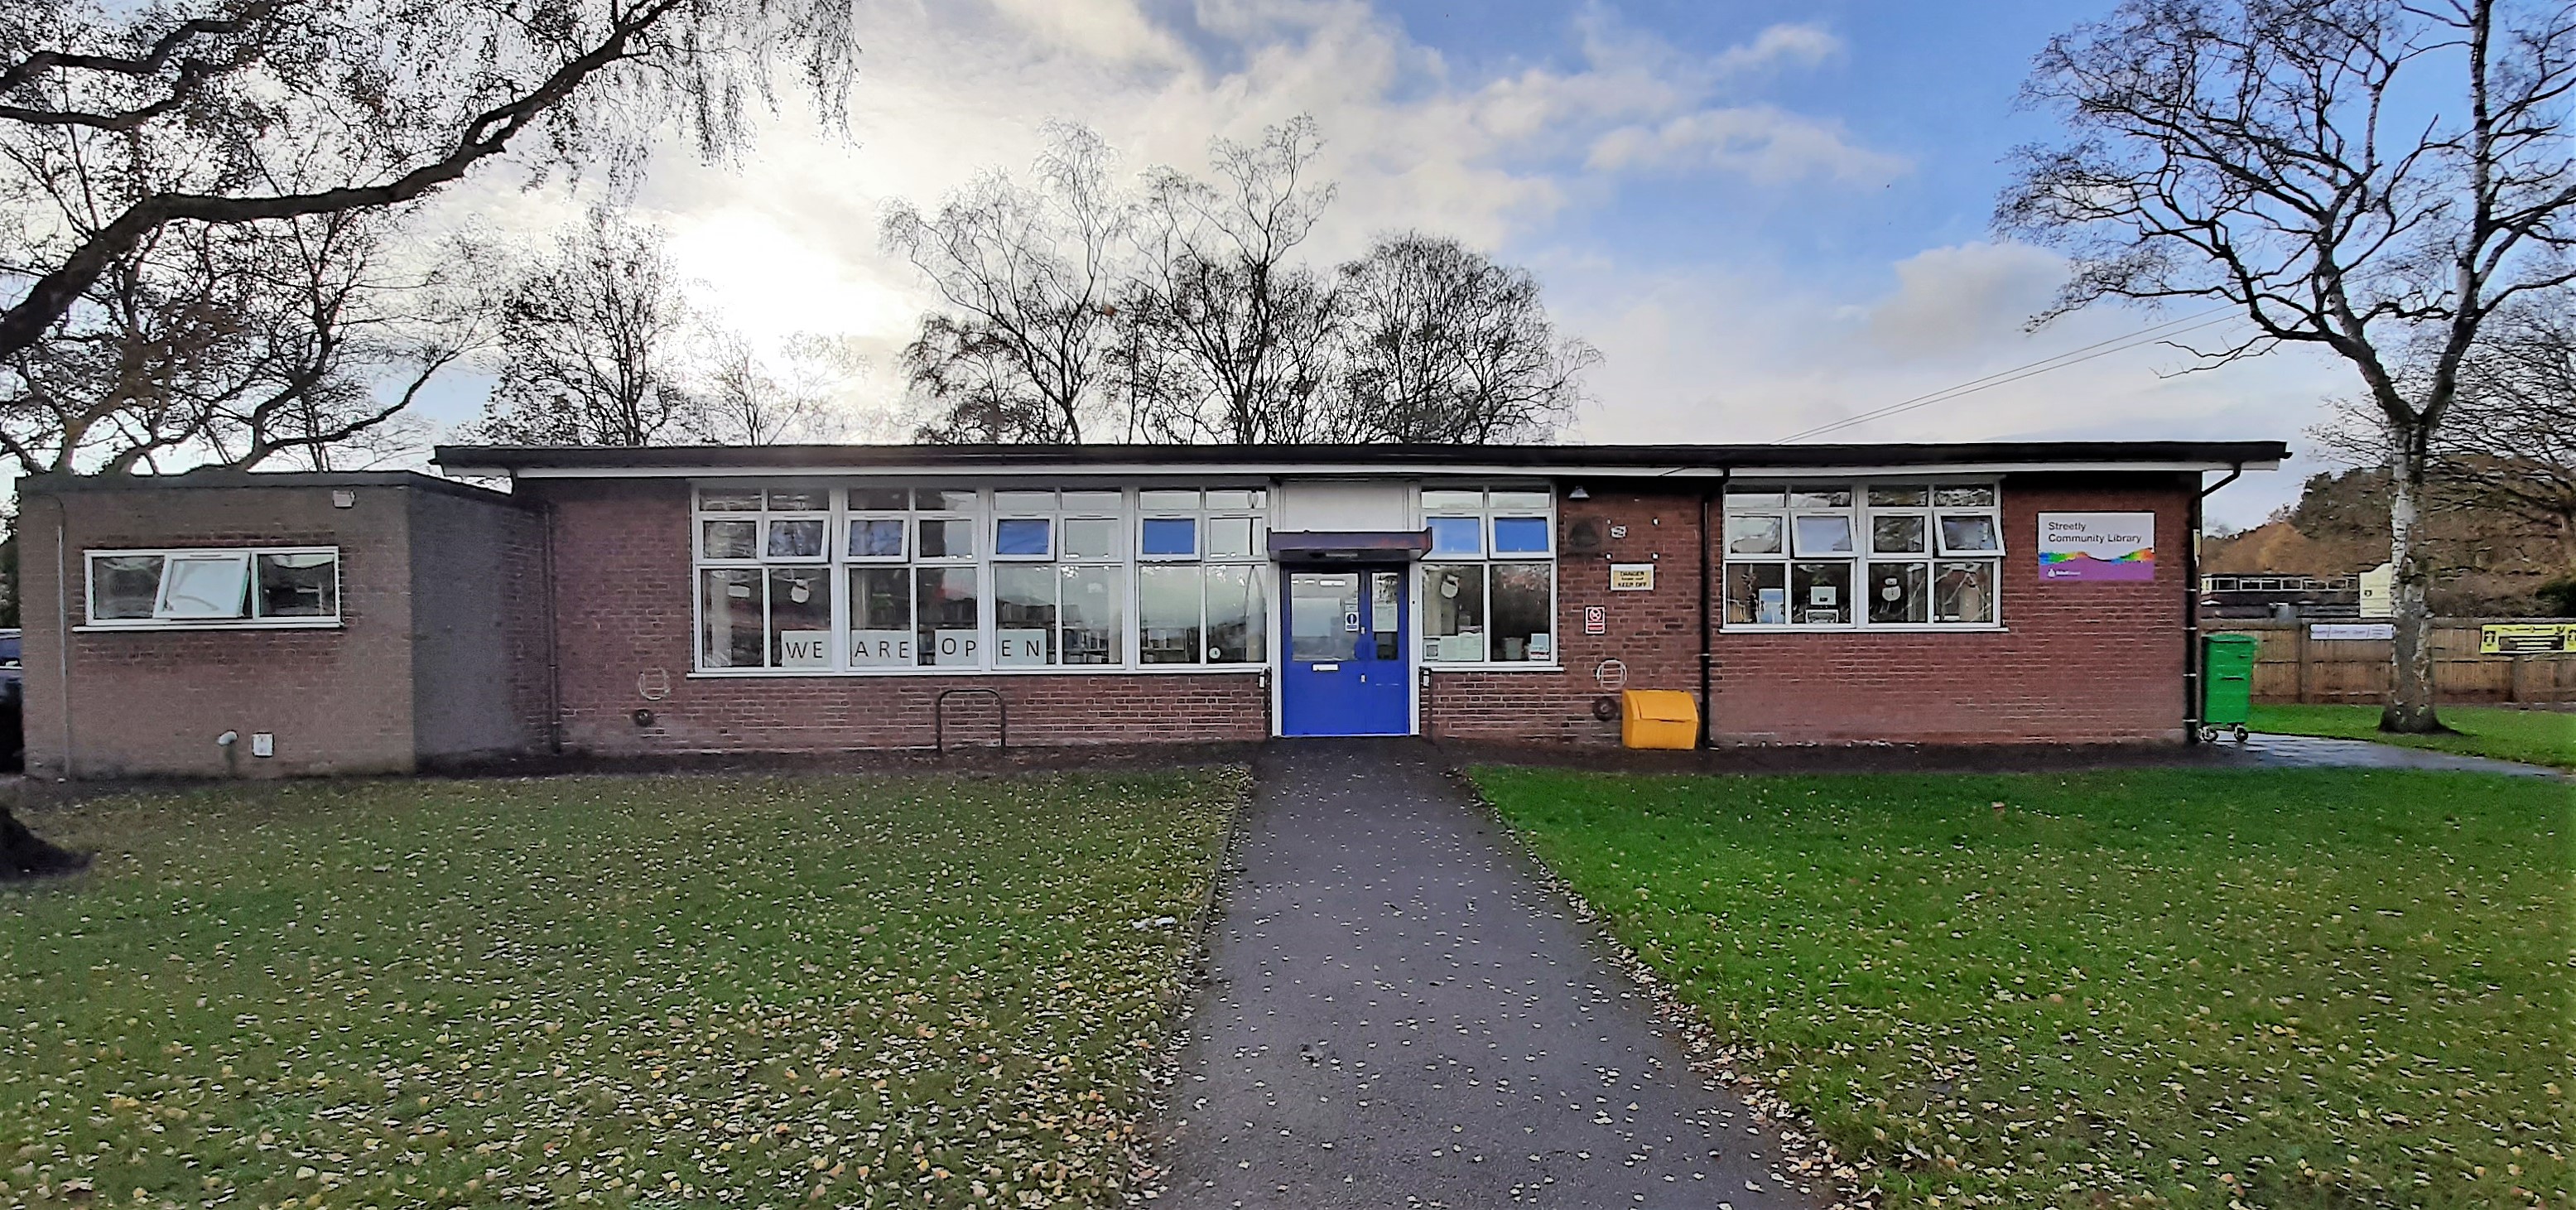 Streetly Community Library Building from the outside 